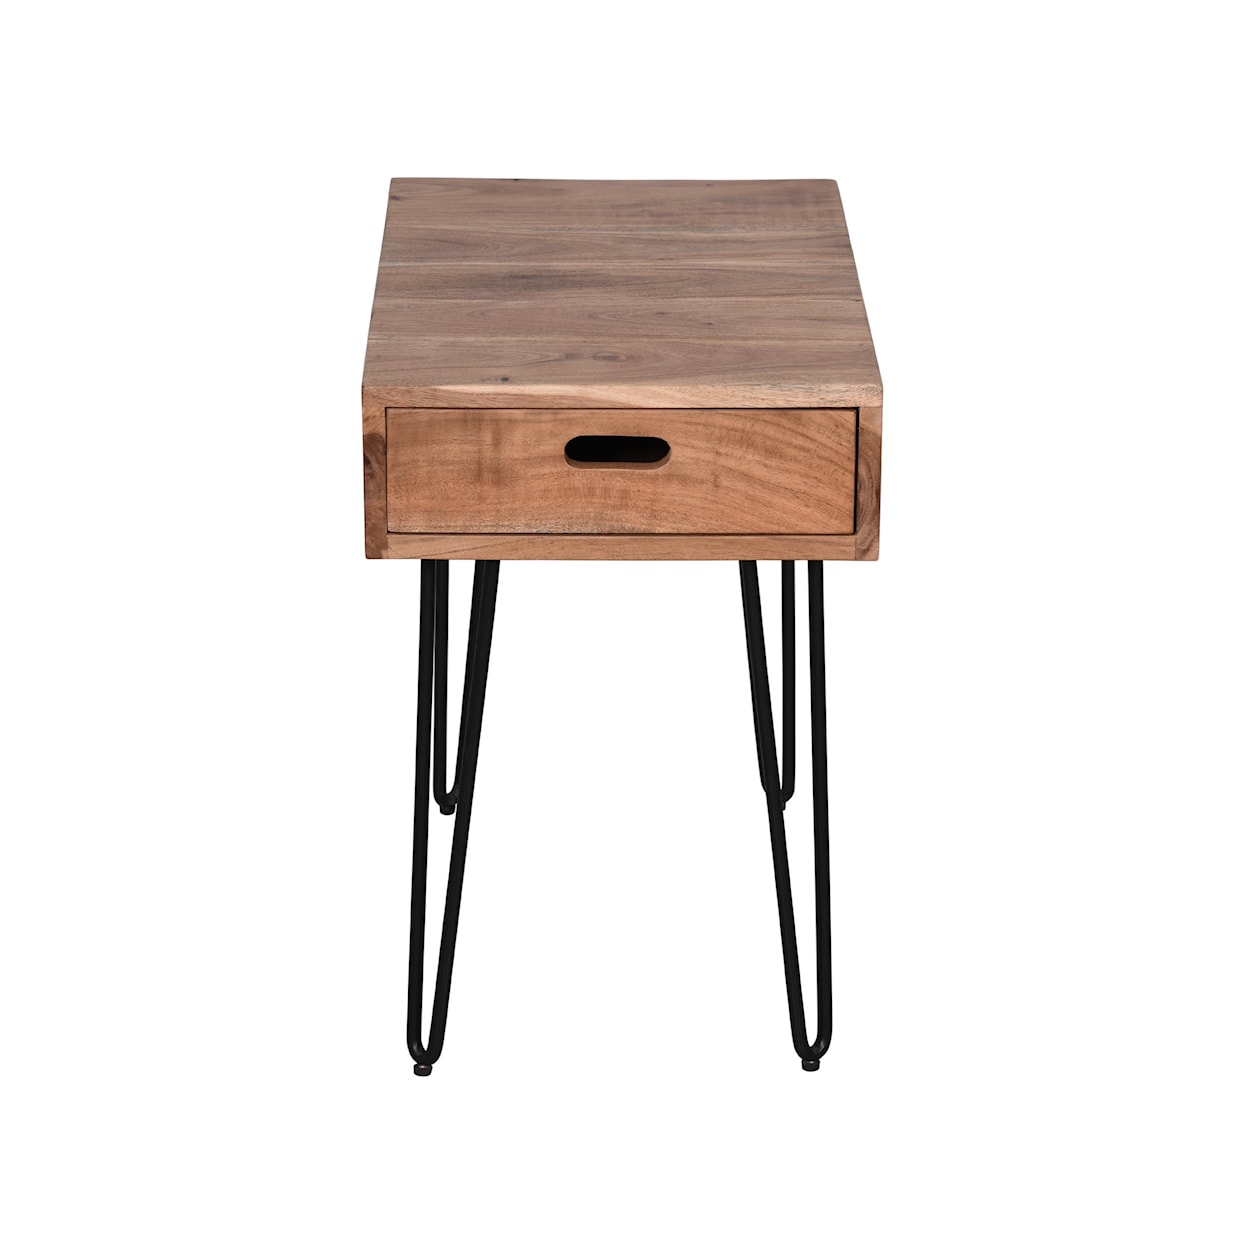 VFM Signature Rollins Chair Side Table